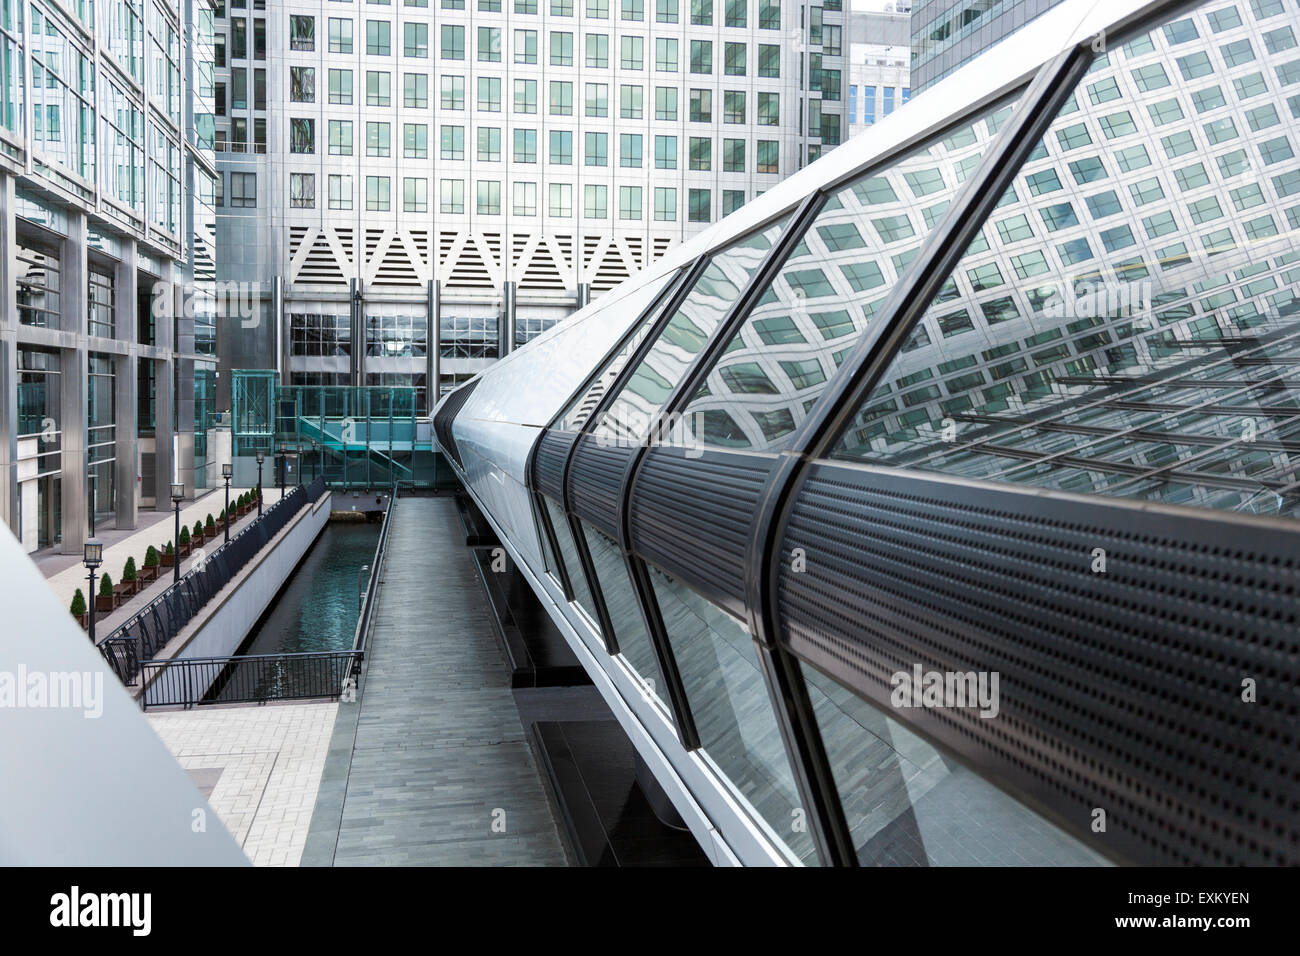 New walkway to the Canary Wharf Crossrail station - July 2015, London, England Stock Photo